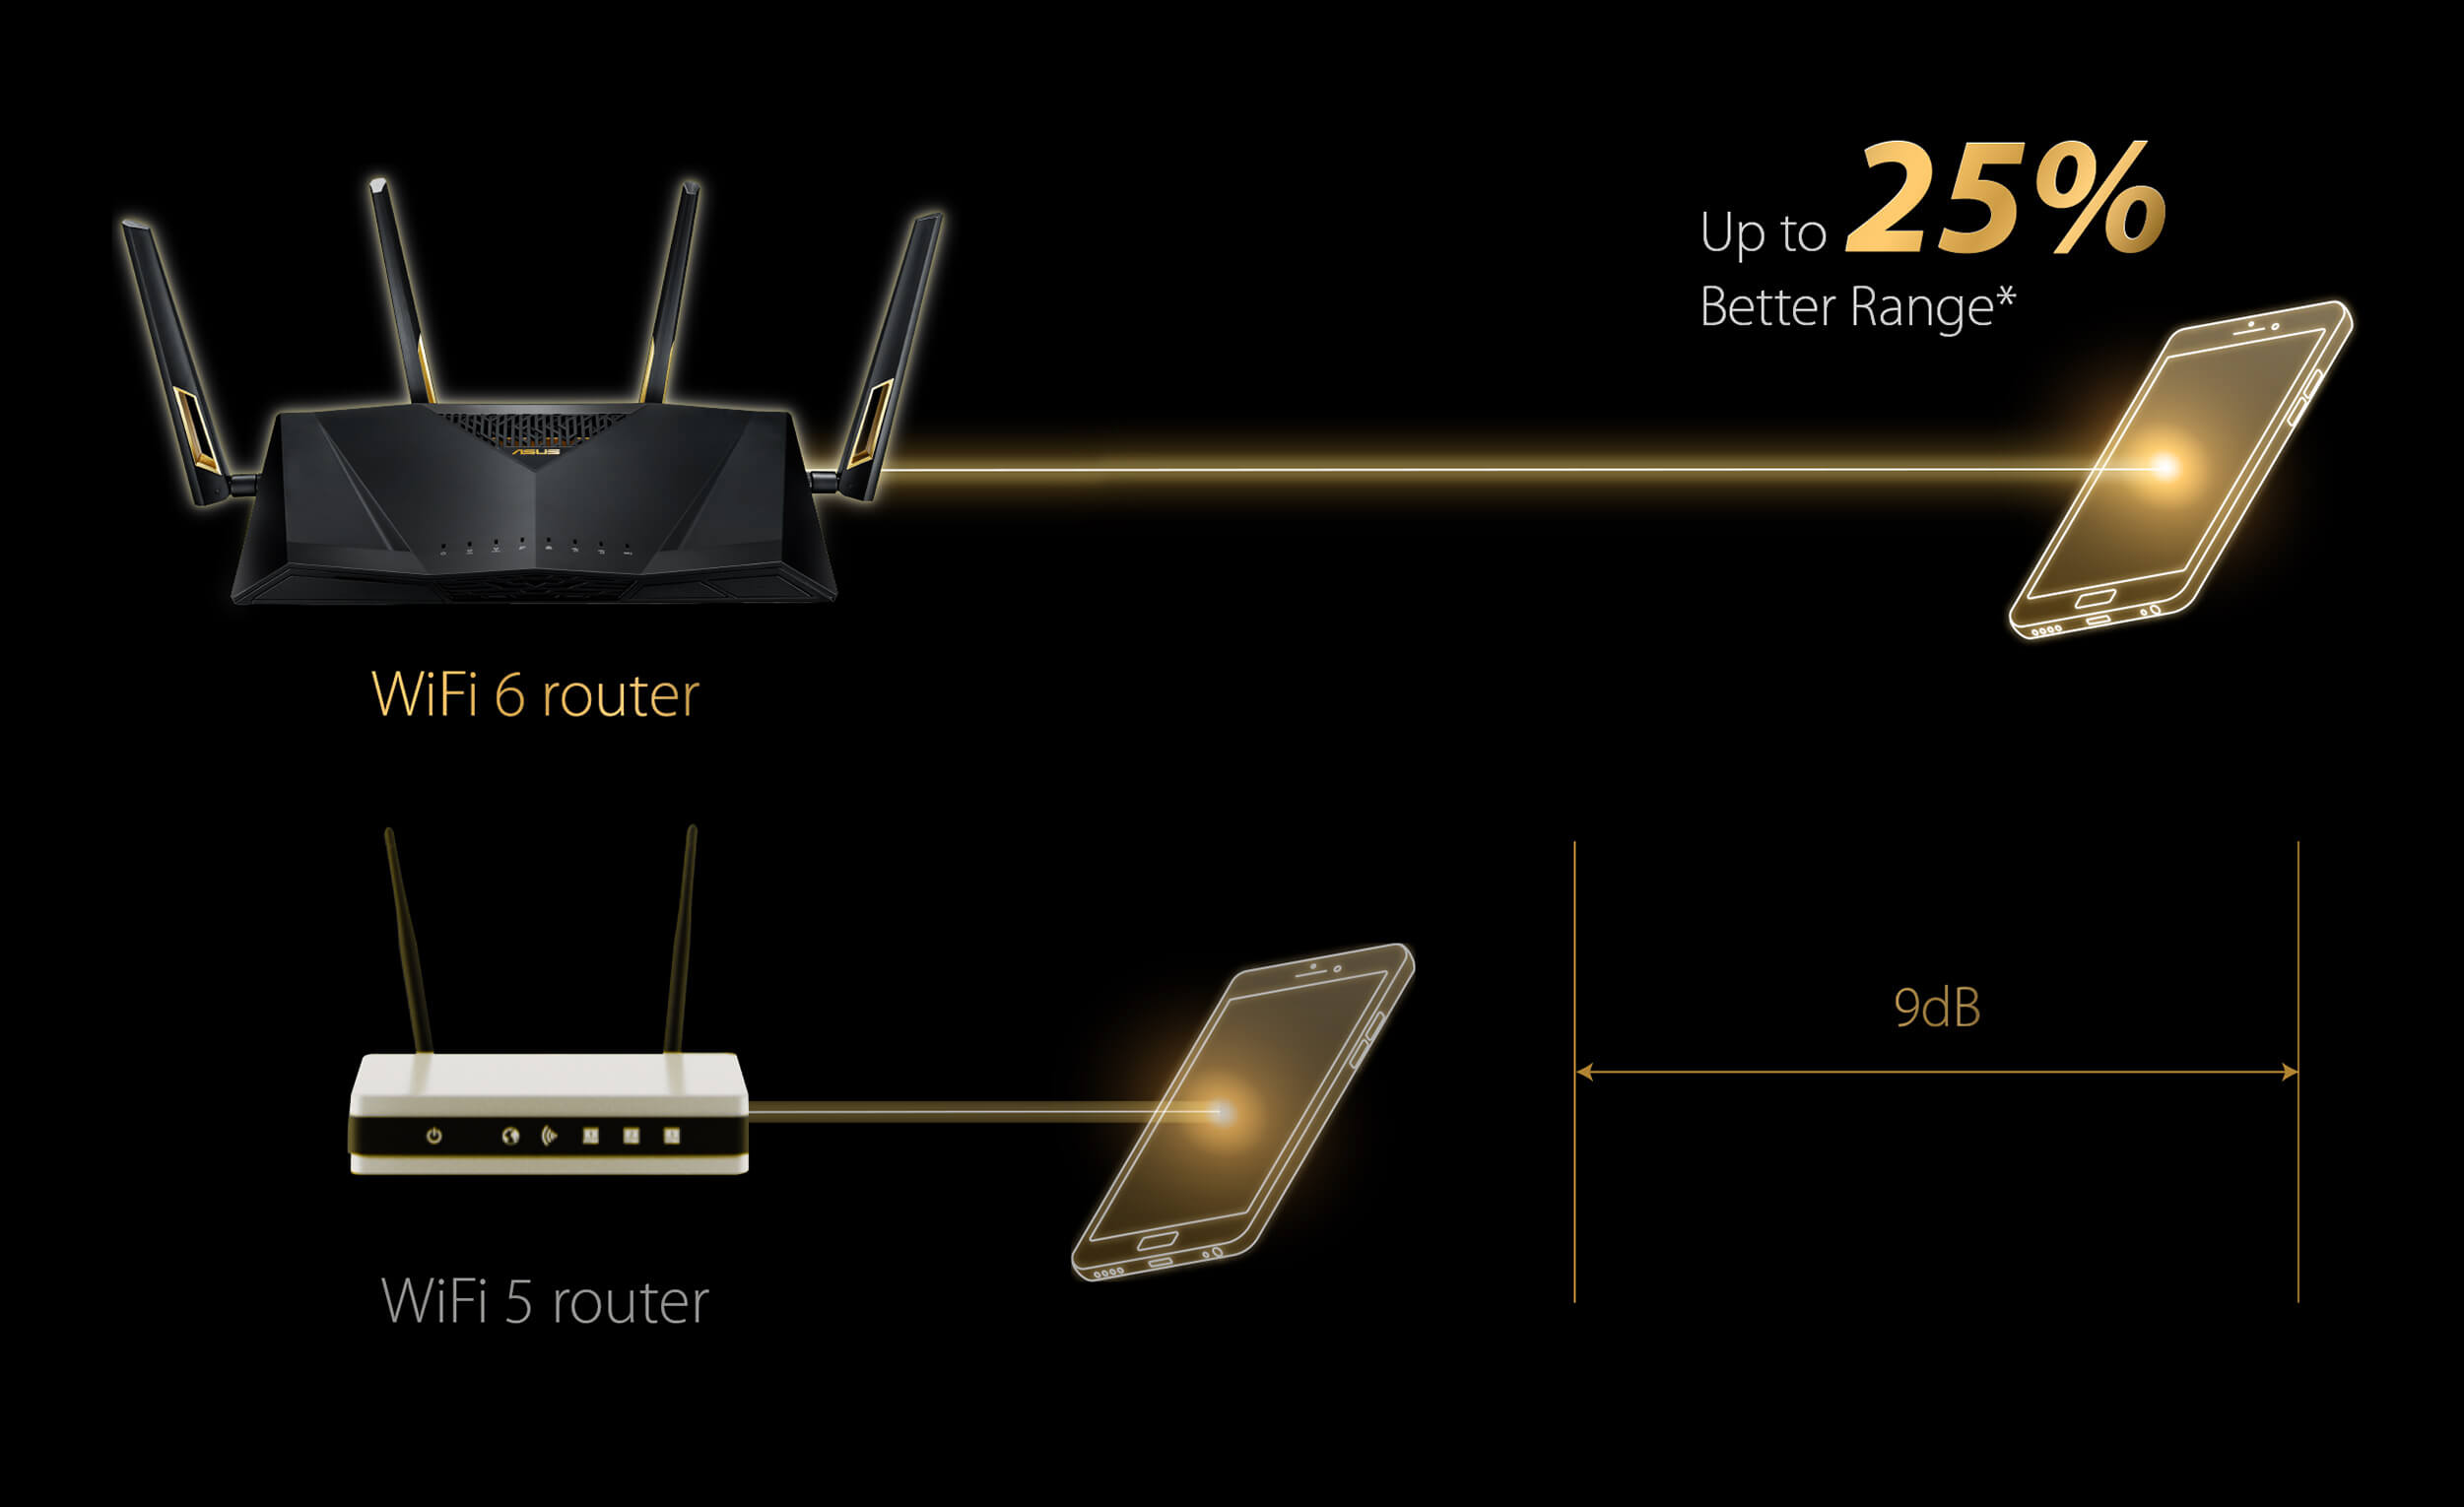 Asus Router Target Wake Time Feature with Wi-Fi 6